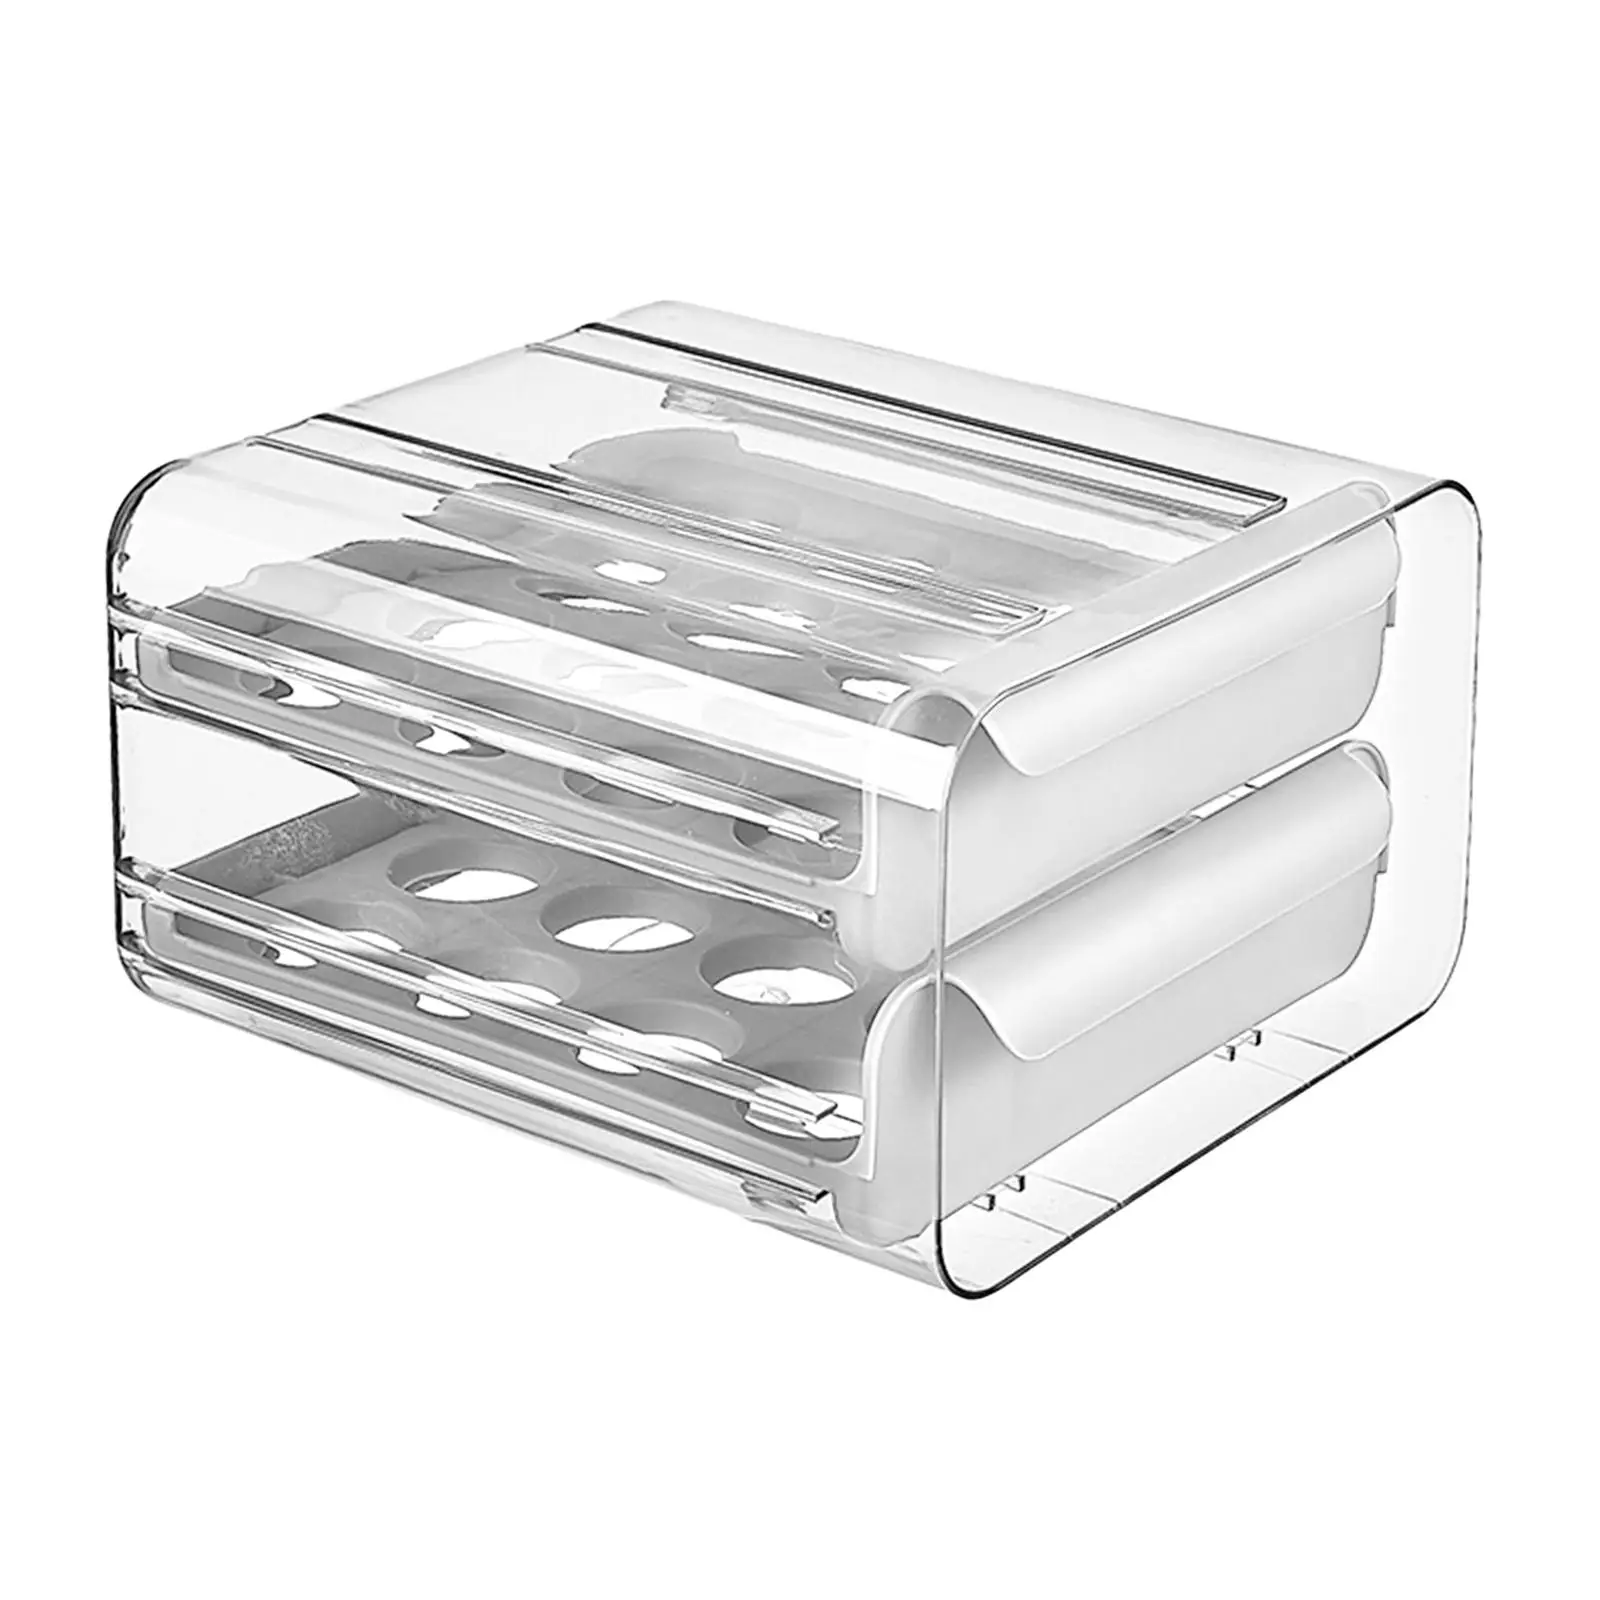 Drawer Type Eggs Holder, Fridge Egg Drawer Organizer, 2 Layers Pull Out Refrigerator Egg Container, 32 Egg Trays Large Capacity